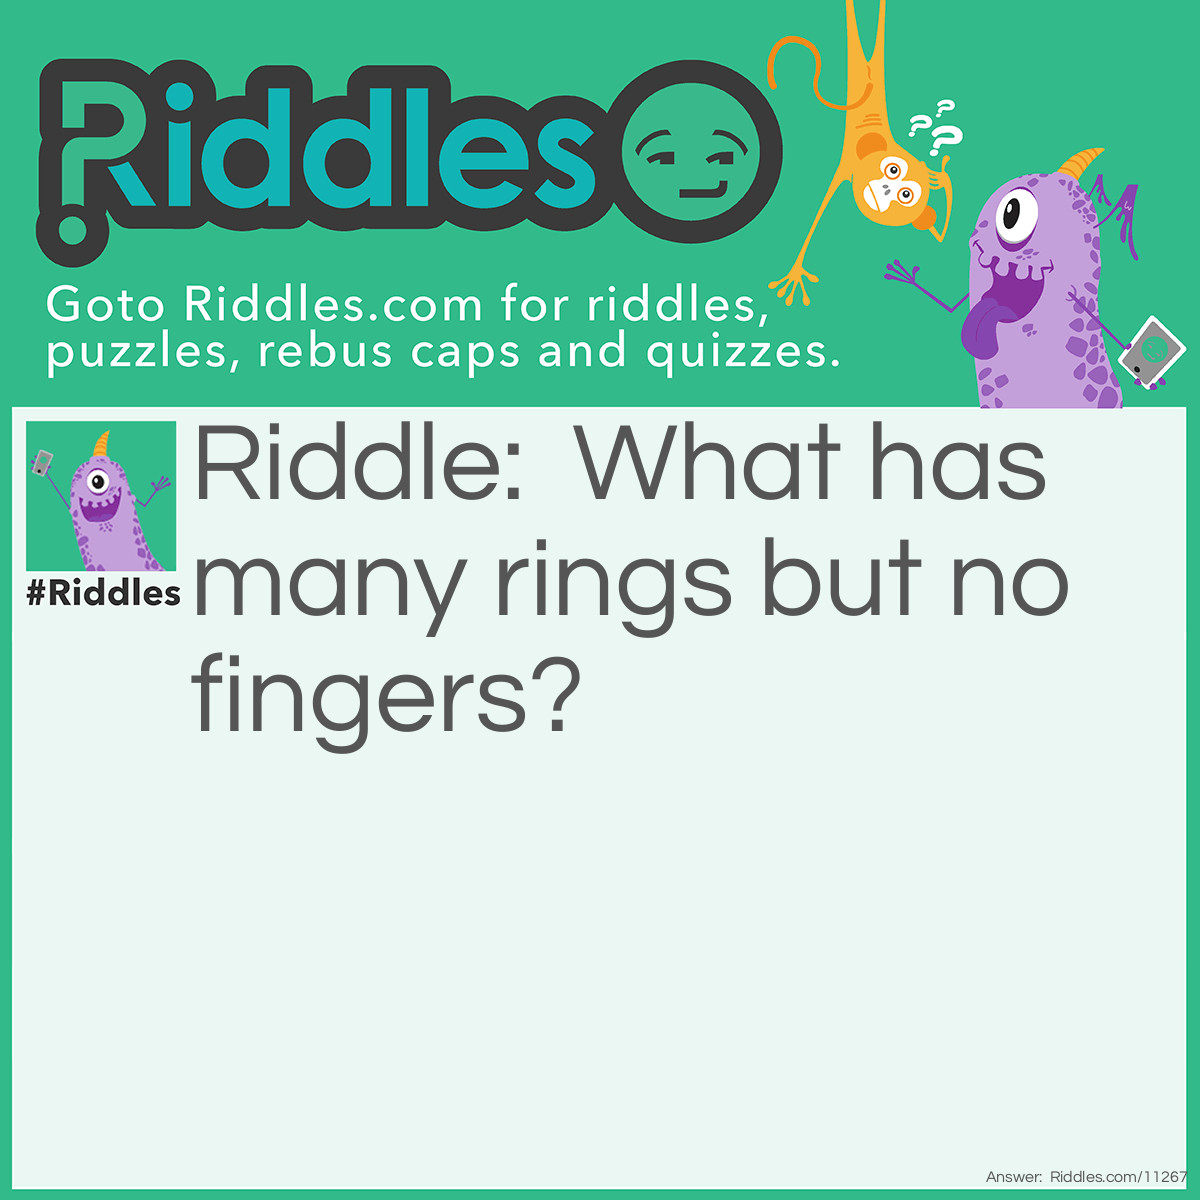 Riddle: What has many rings but no fingers? Answer: A telephone.